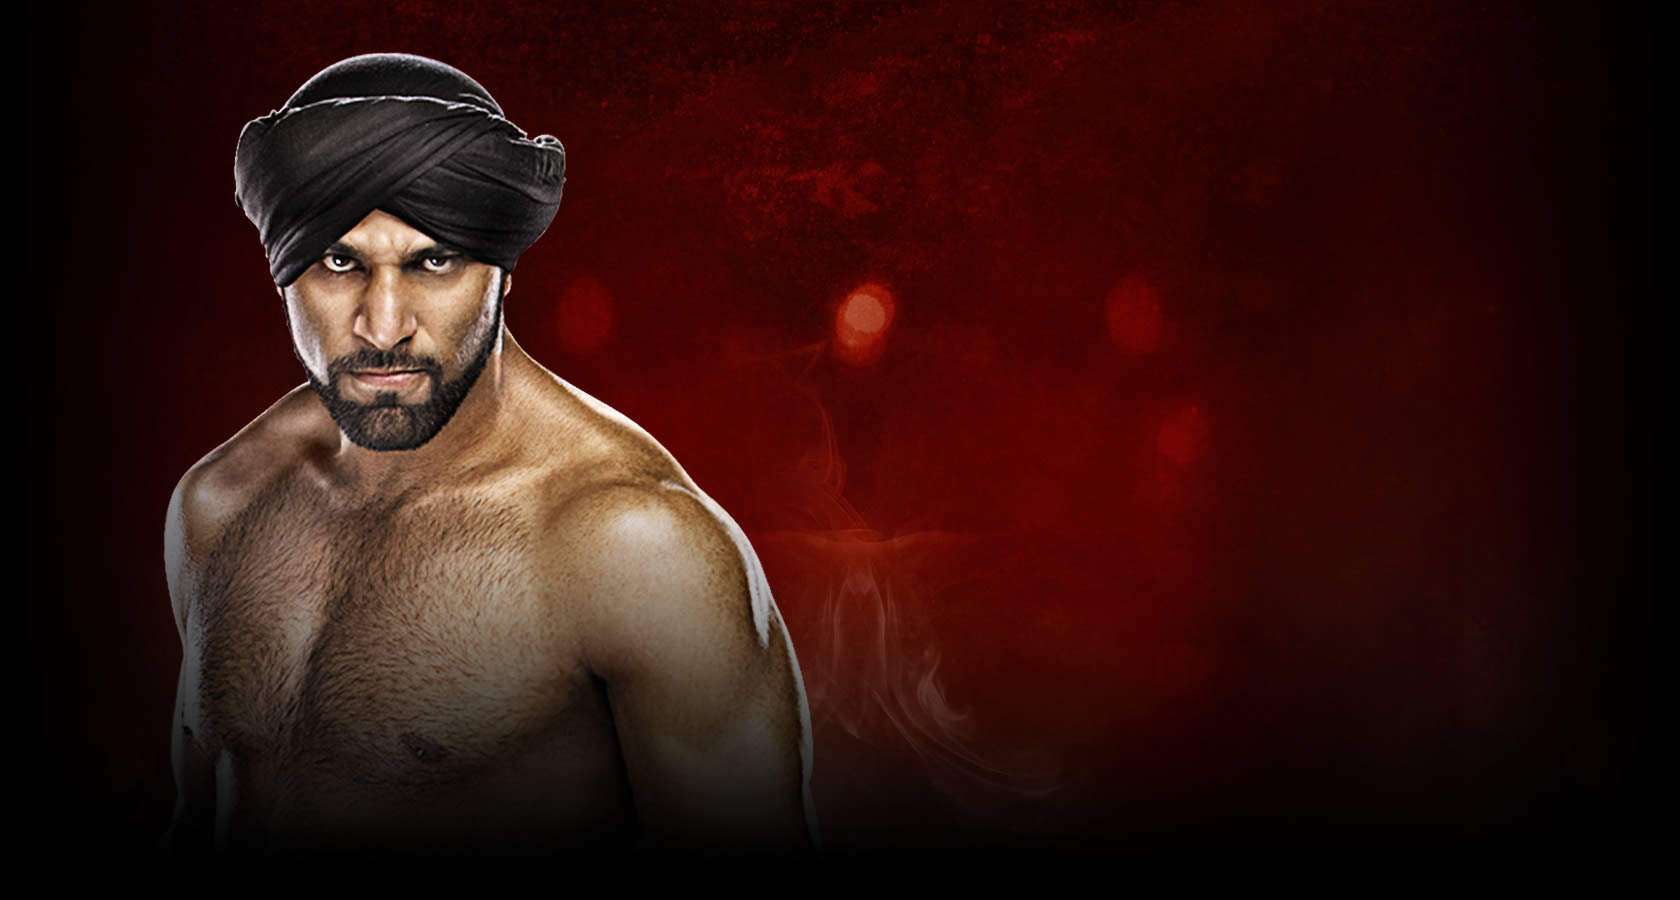 Jinder Mahal Looking Angry In Turban